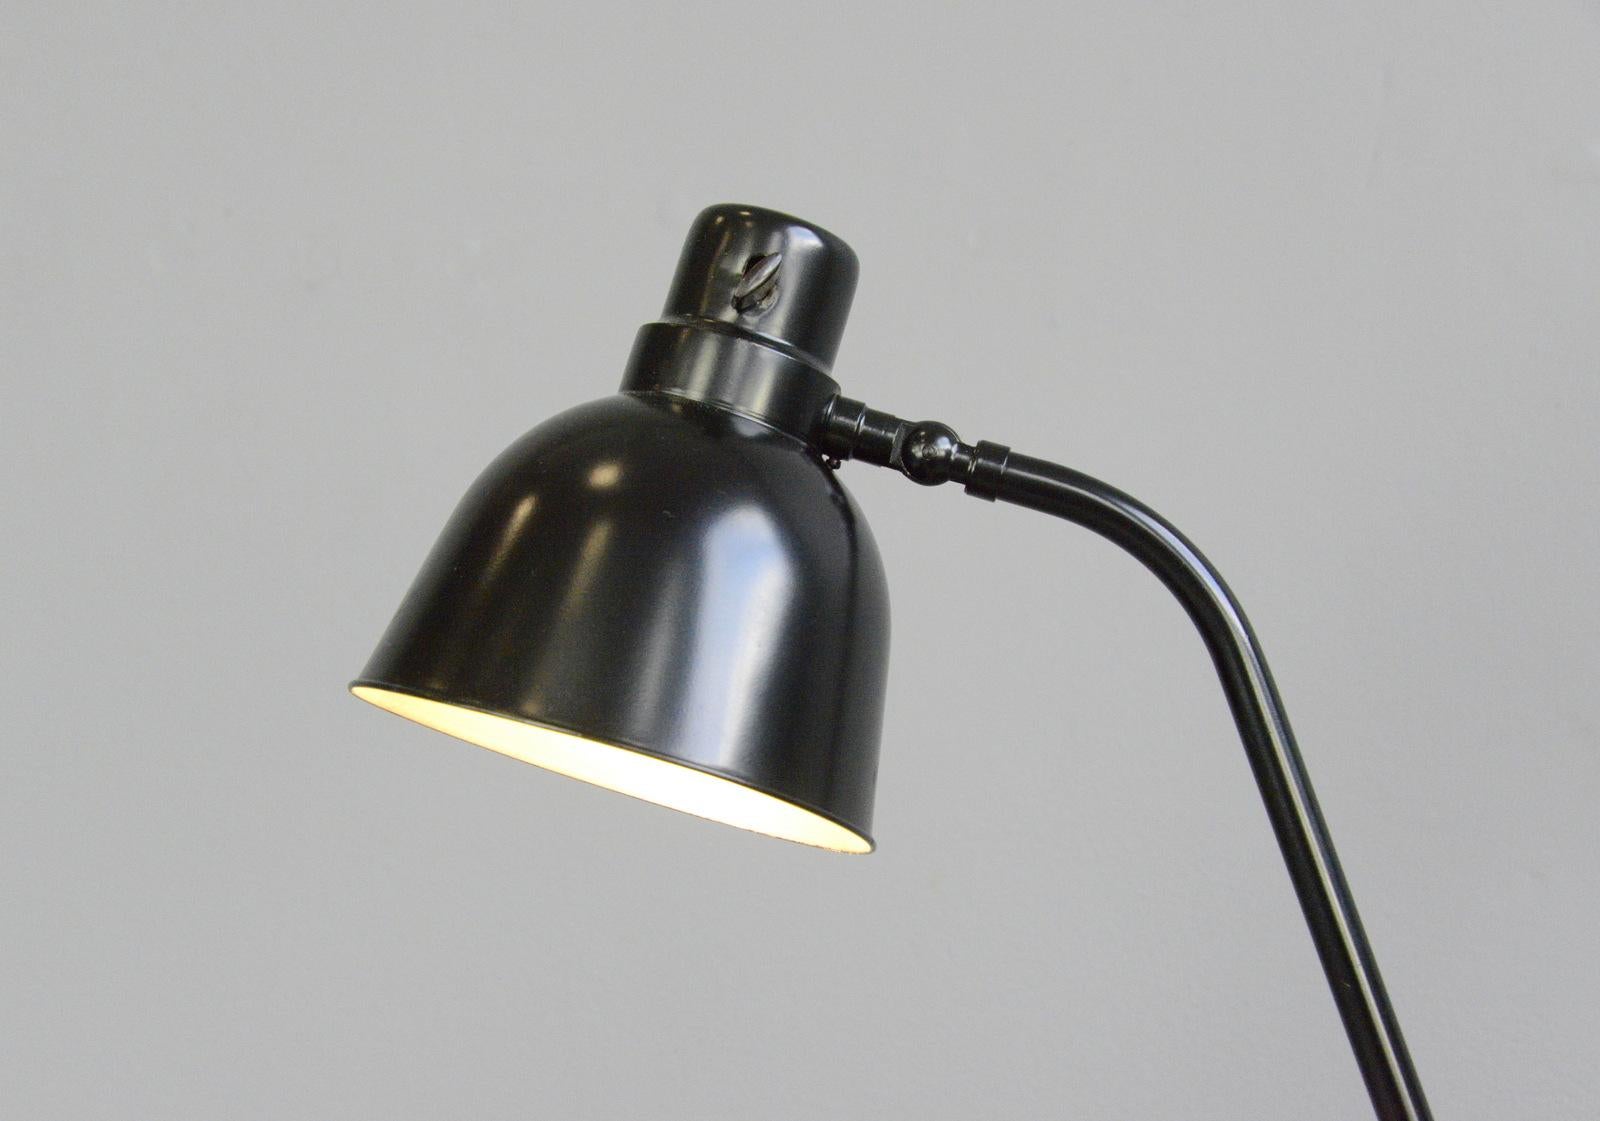 German Desk Lamp Circa 1930s

- Articulated arm and shade
- Original On/Off toggle switch on the shade
- Takes E27 fitting bulbs
- German ~ 1930s
- 52cm tall x 30cm deep x 15cm wide

Condition Report

Fully re wired with modern electrical